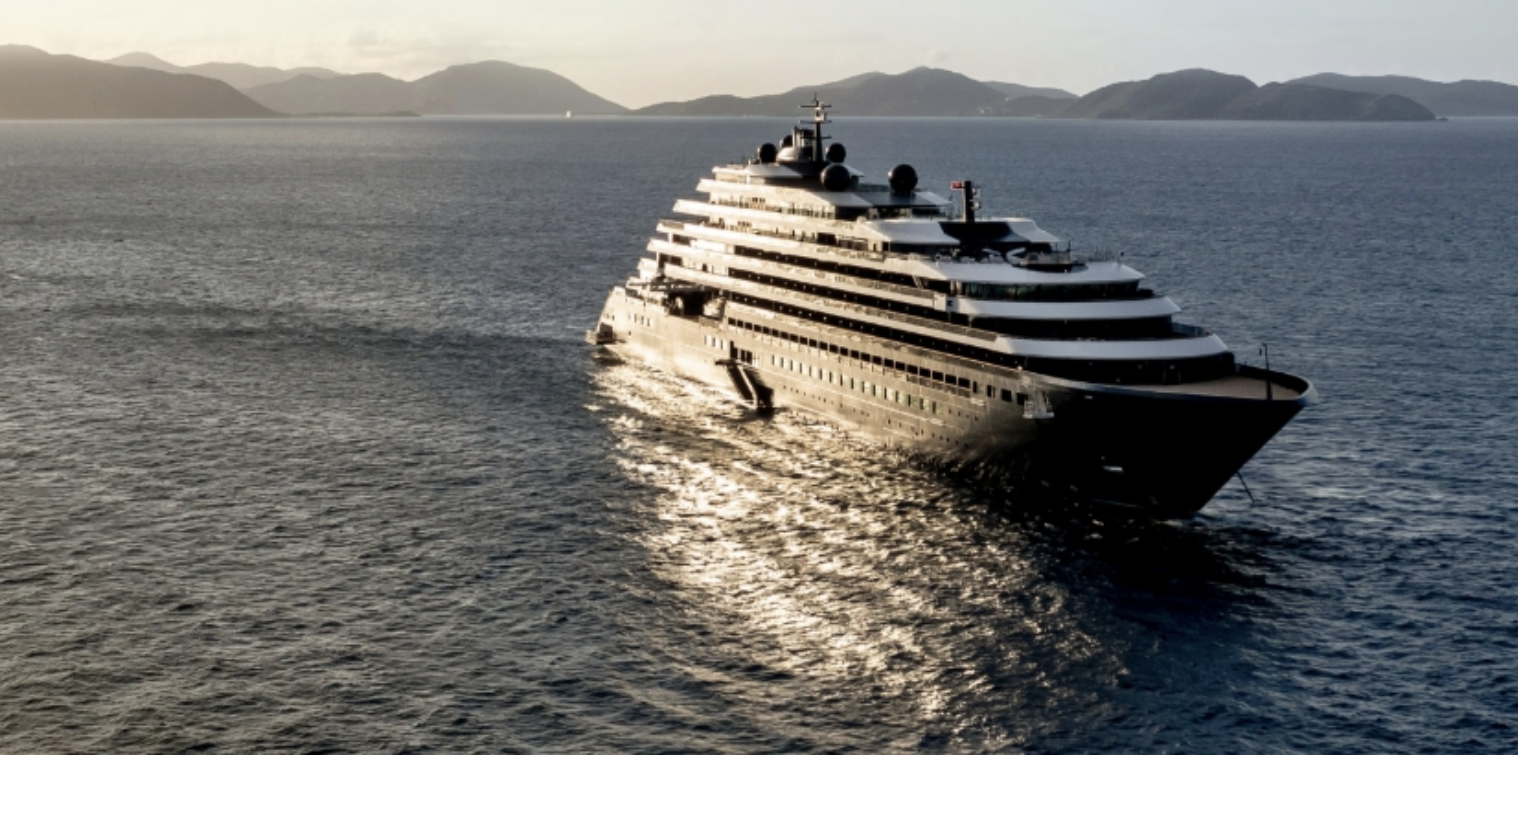 Ritz Carlton Yacht Collection begins construction of new vessel